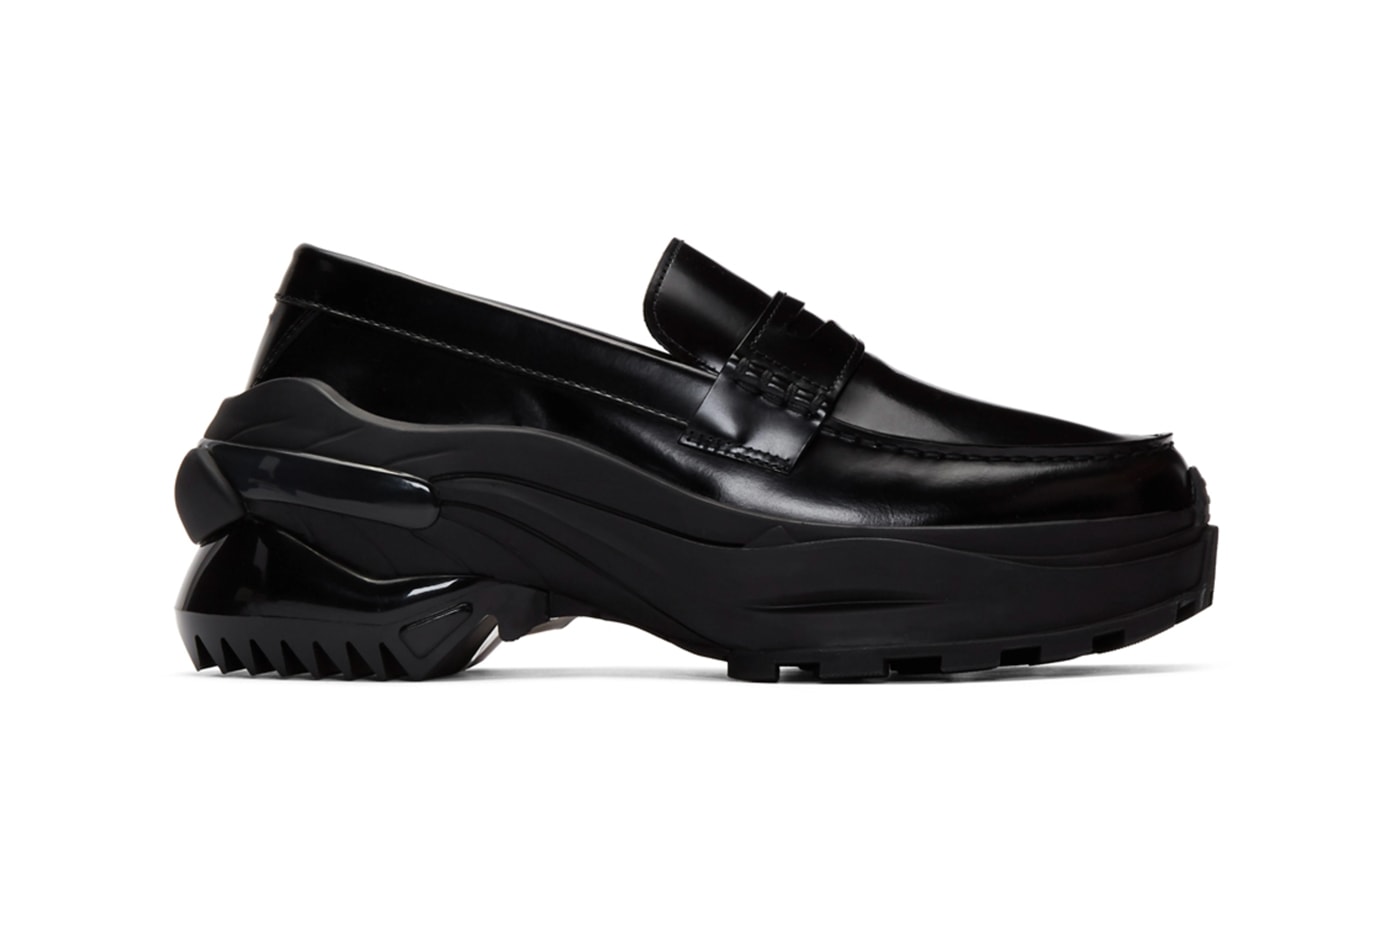 Maison Margiela Black Cross Loafers derby dress shoes footwear sneakers trainers runners leather penny atelier made in italy kicks sartorial bespoke polished reconstruction reworked